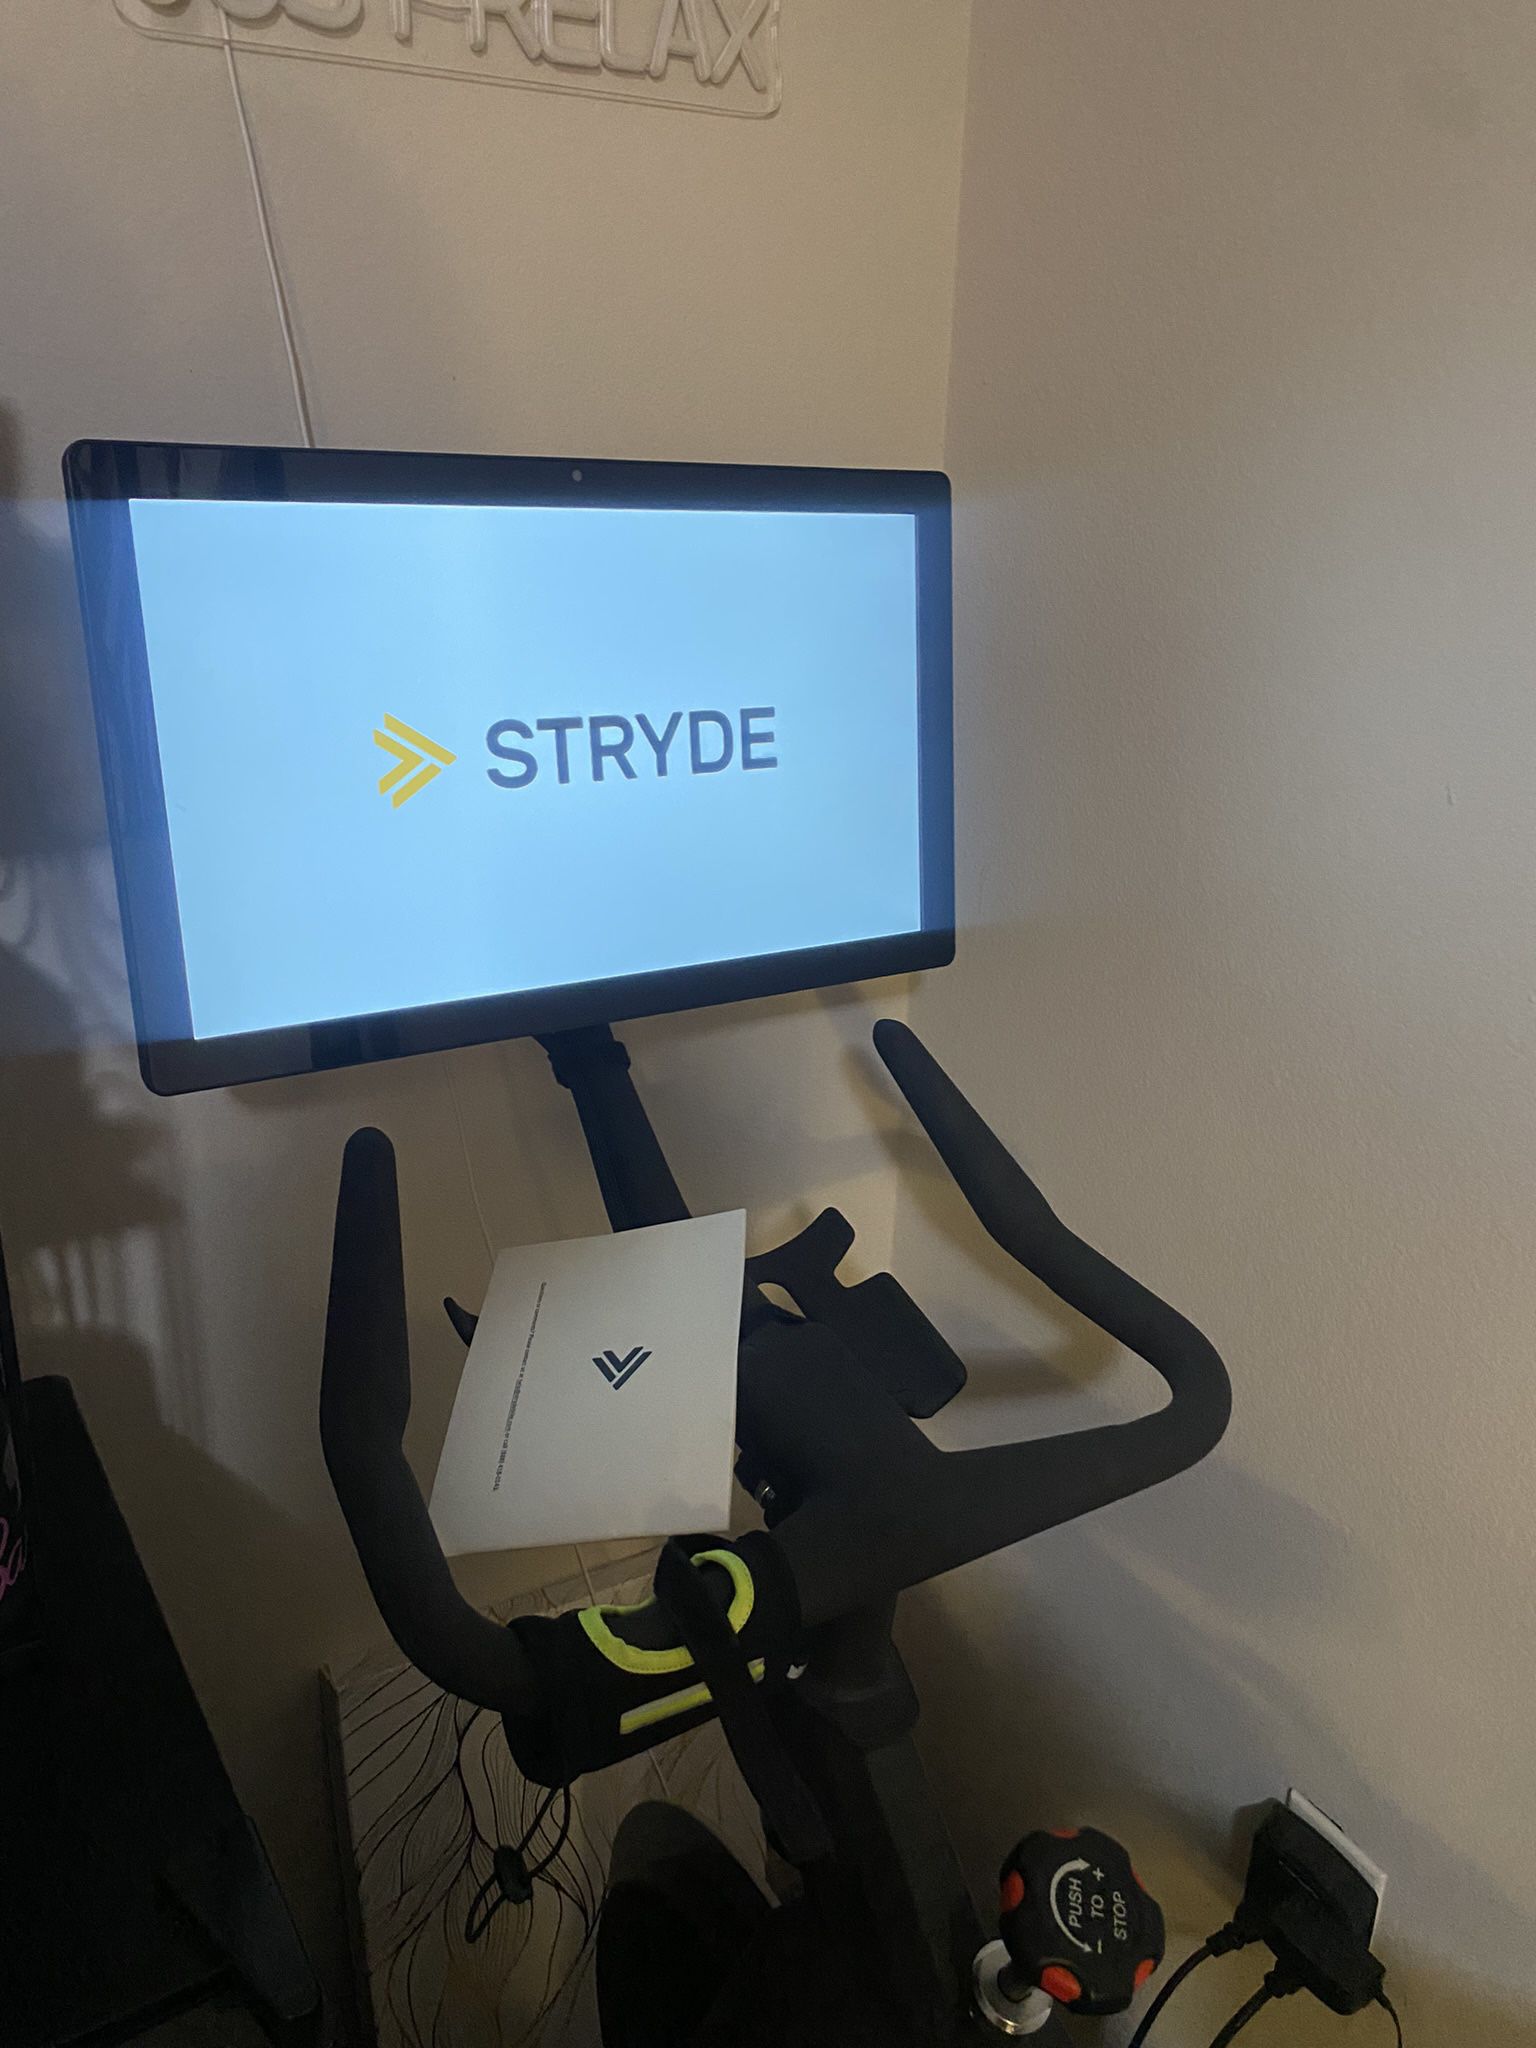 Stryde Exercise Bike (like Peloton) No Membership Required 